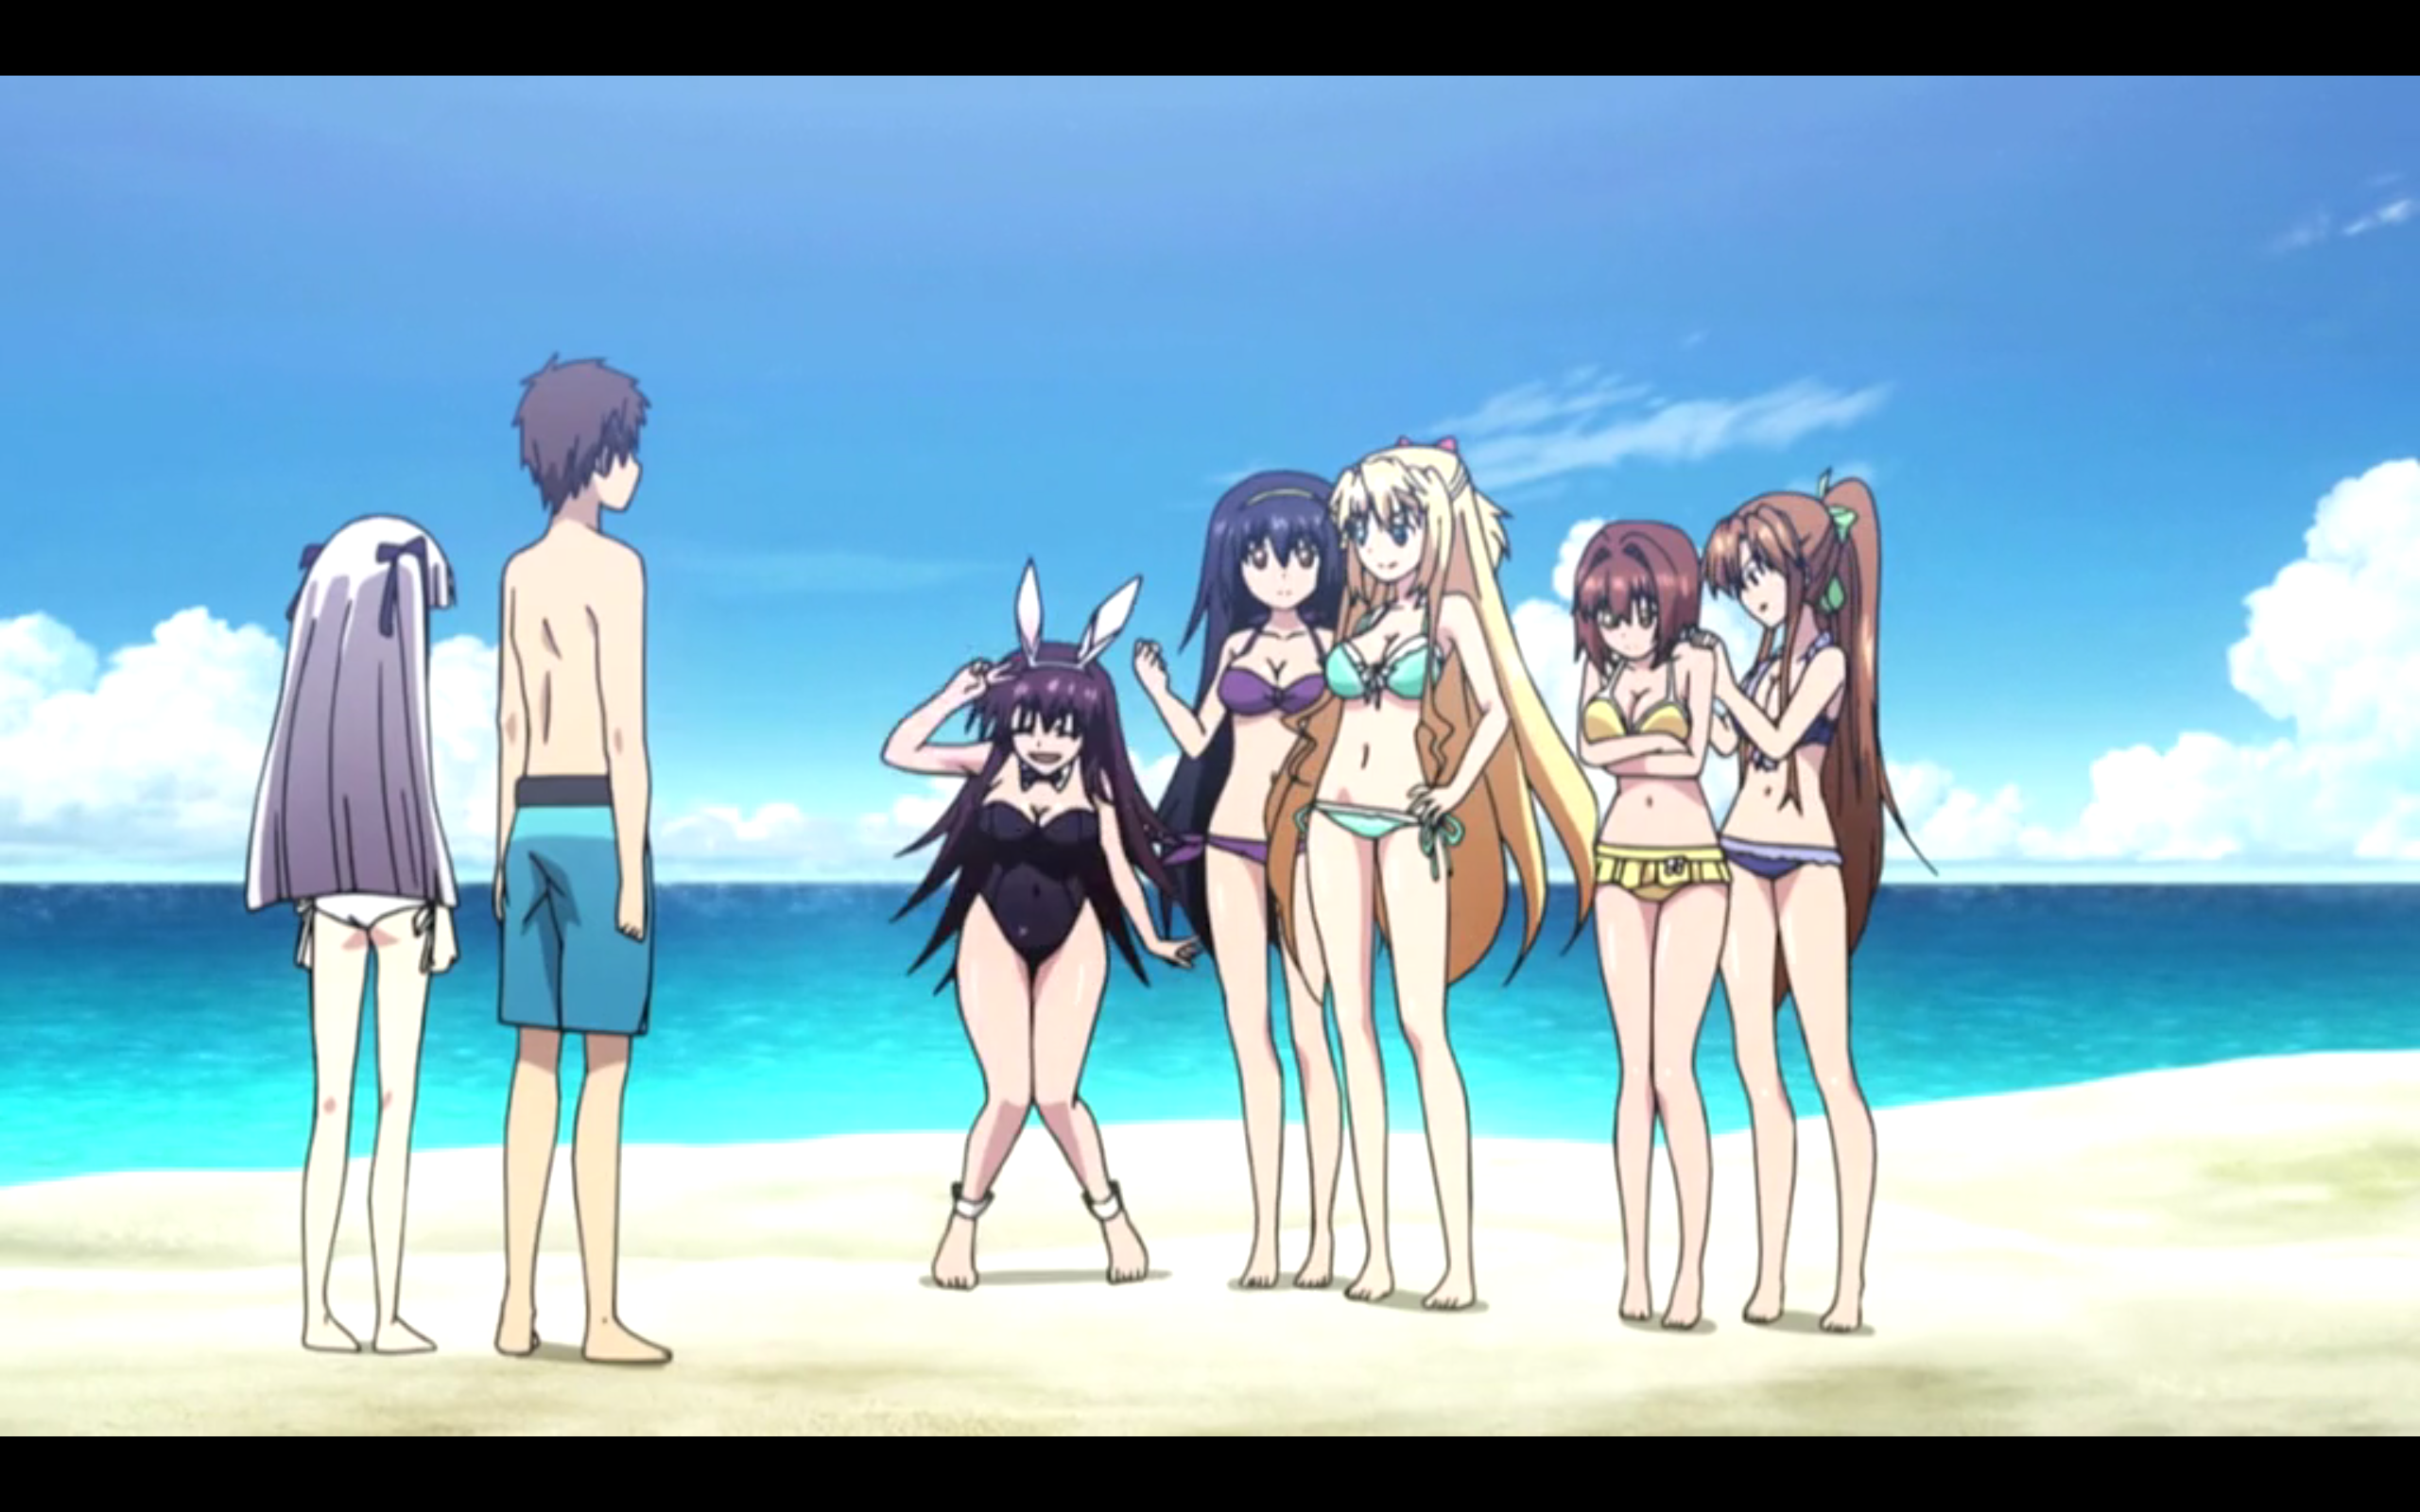 A Beach Scene With 6 Girls So Remind Me Why Anime Has - Anime Beach Girl Scenes , HD Wallpaper & Backgrounds